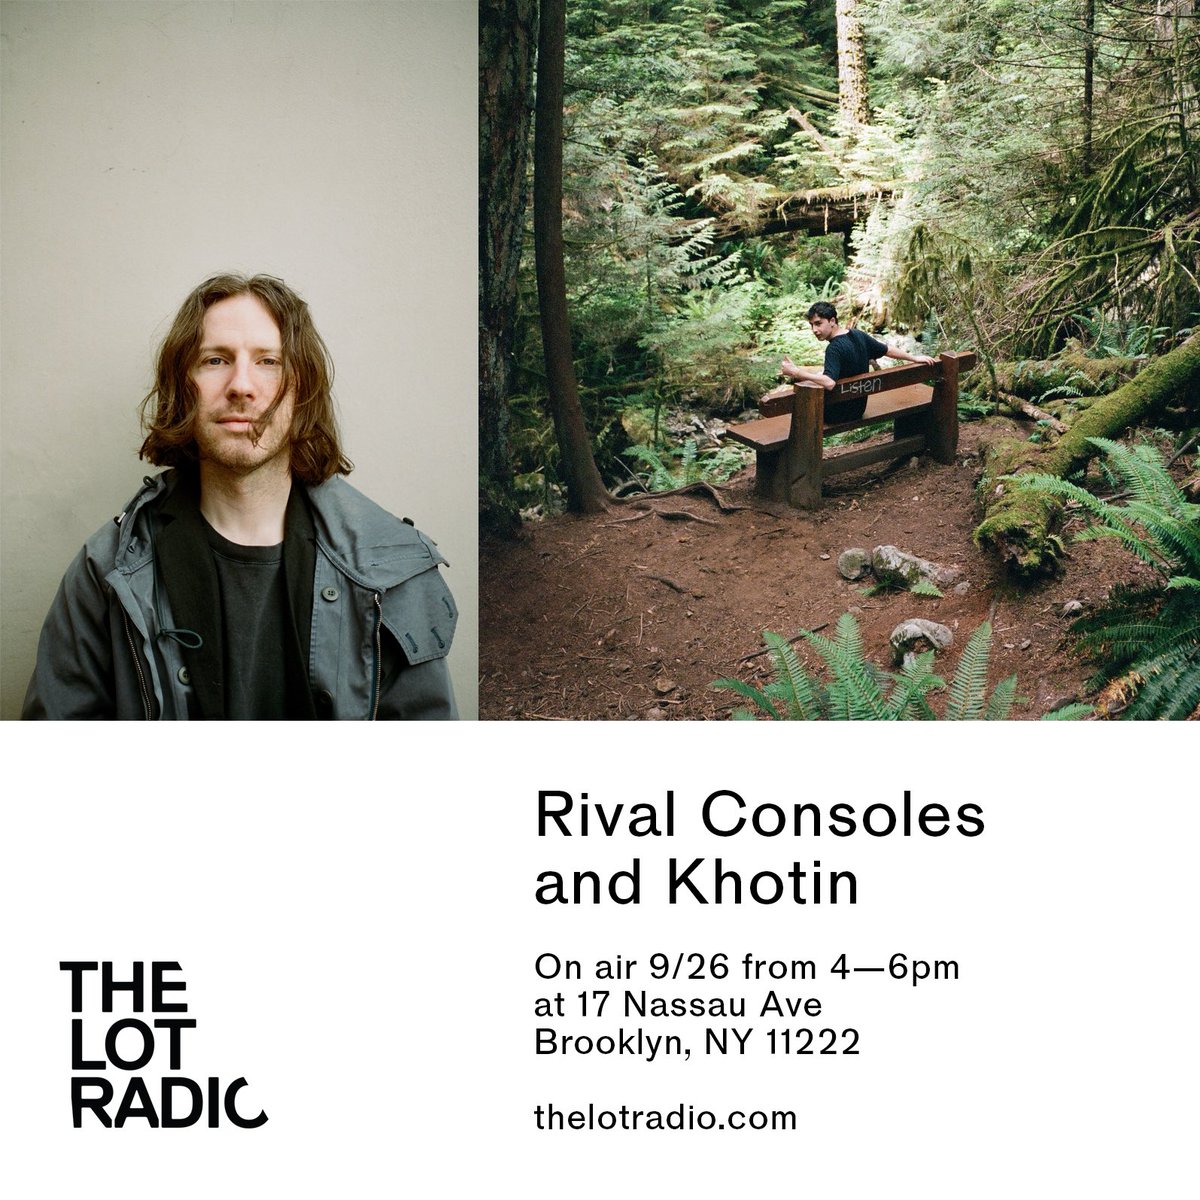 Having just arrived in Brooklyn, @RivalConsoles will be on @TheLotRadio with Khotin (@dylankf) ahead of tomorrow’s tour start at the @MusicHallofWB — come down to 17 Nassau Avenue or tune in live from 4pm here: thelotradio.com